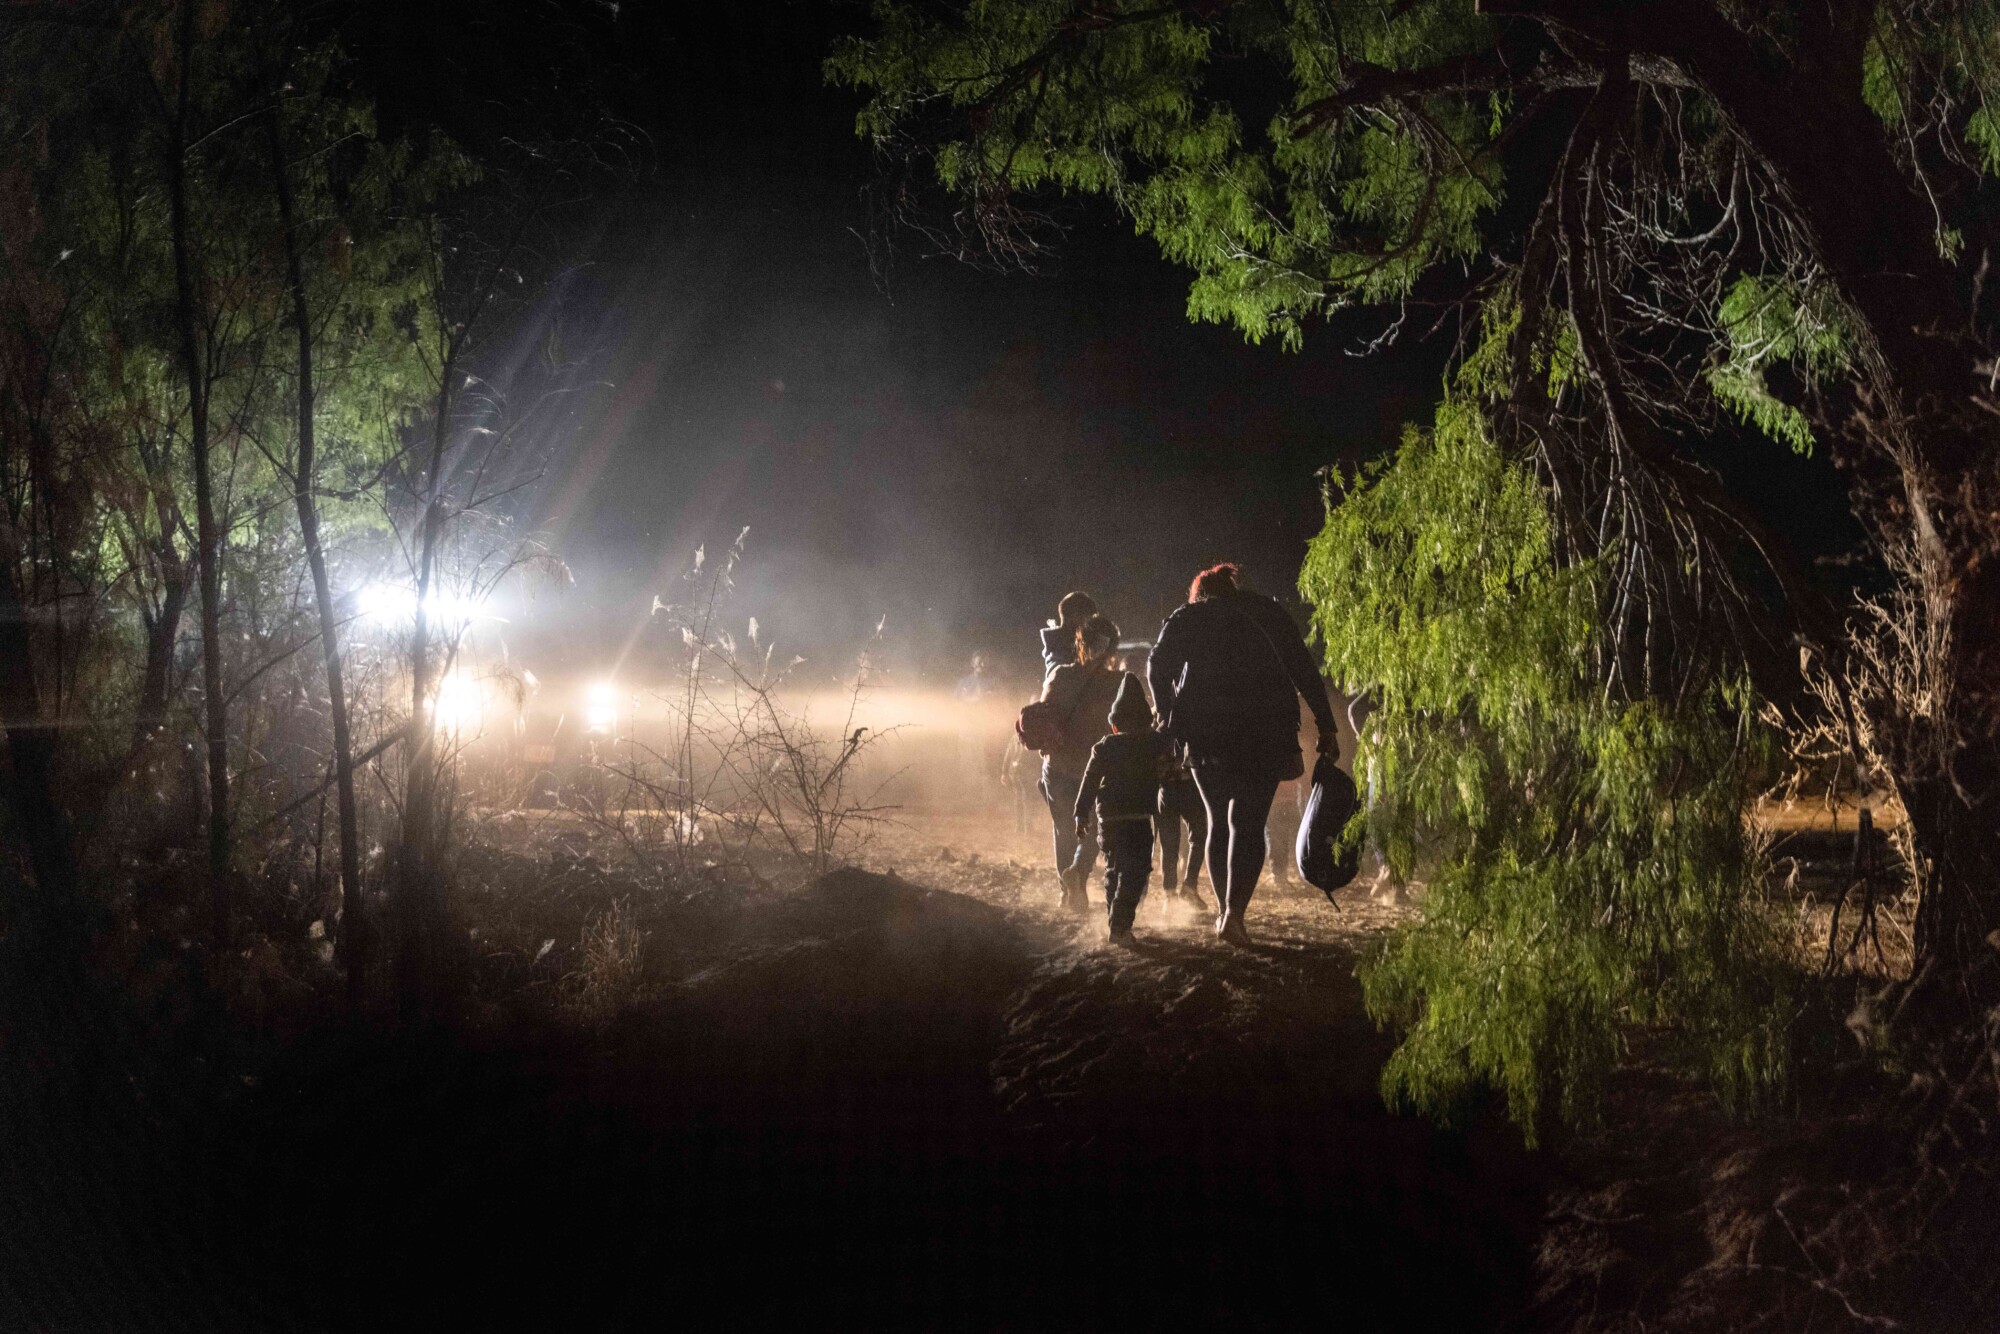 Heavily Armed Smugglers on Ranchers’ Land